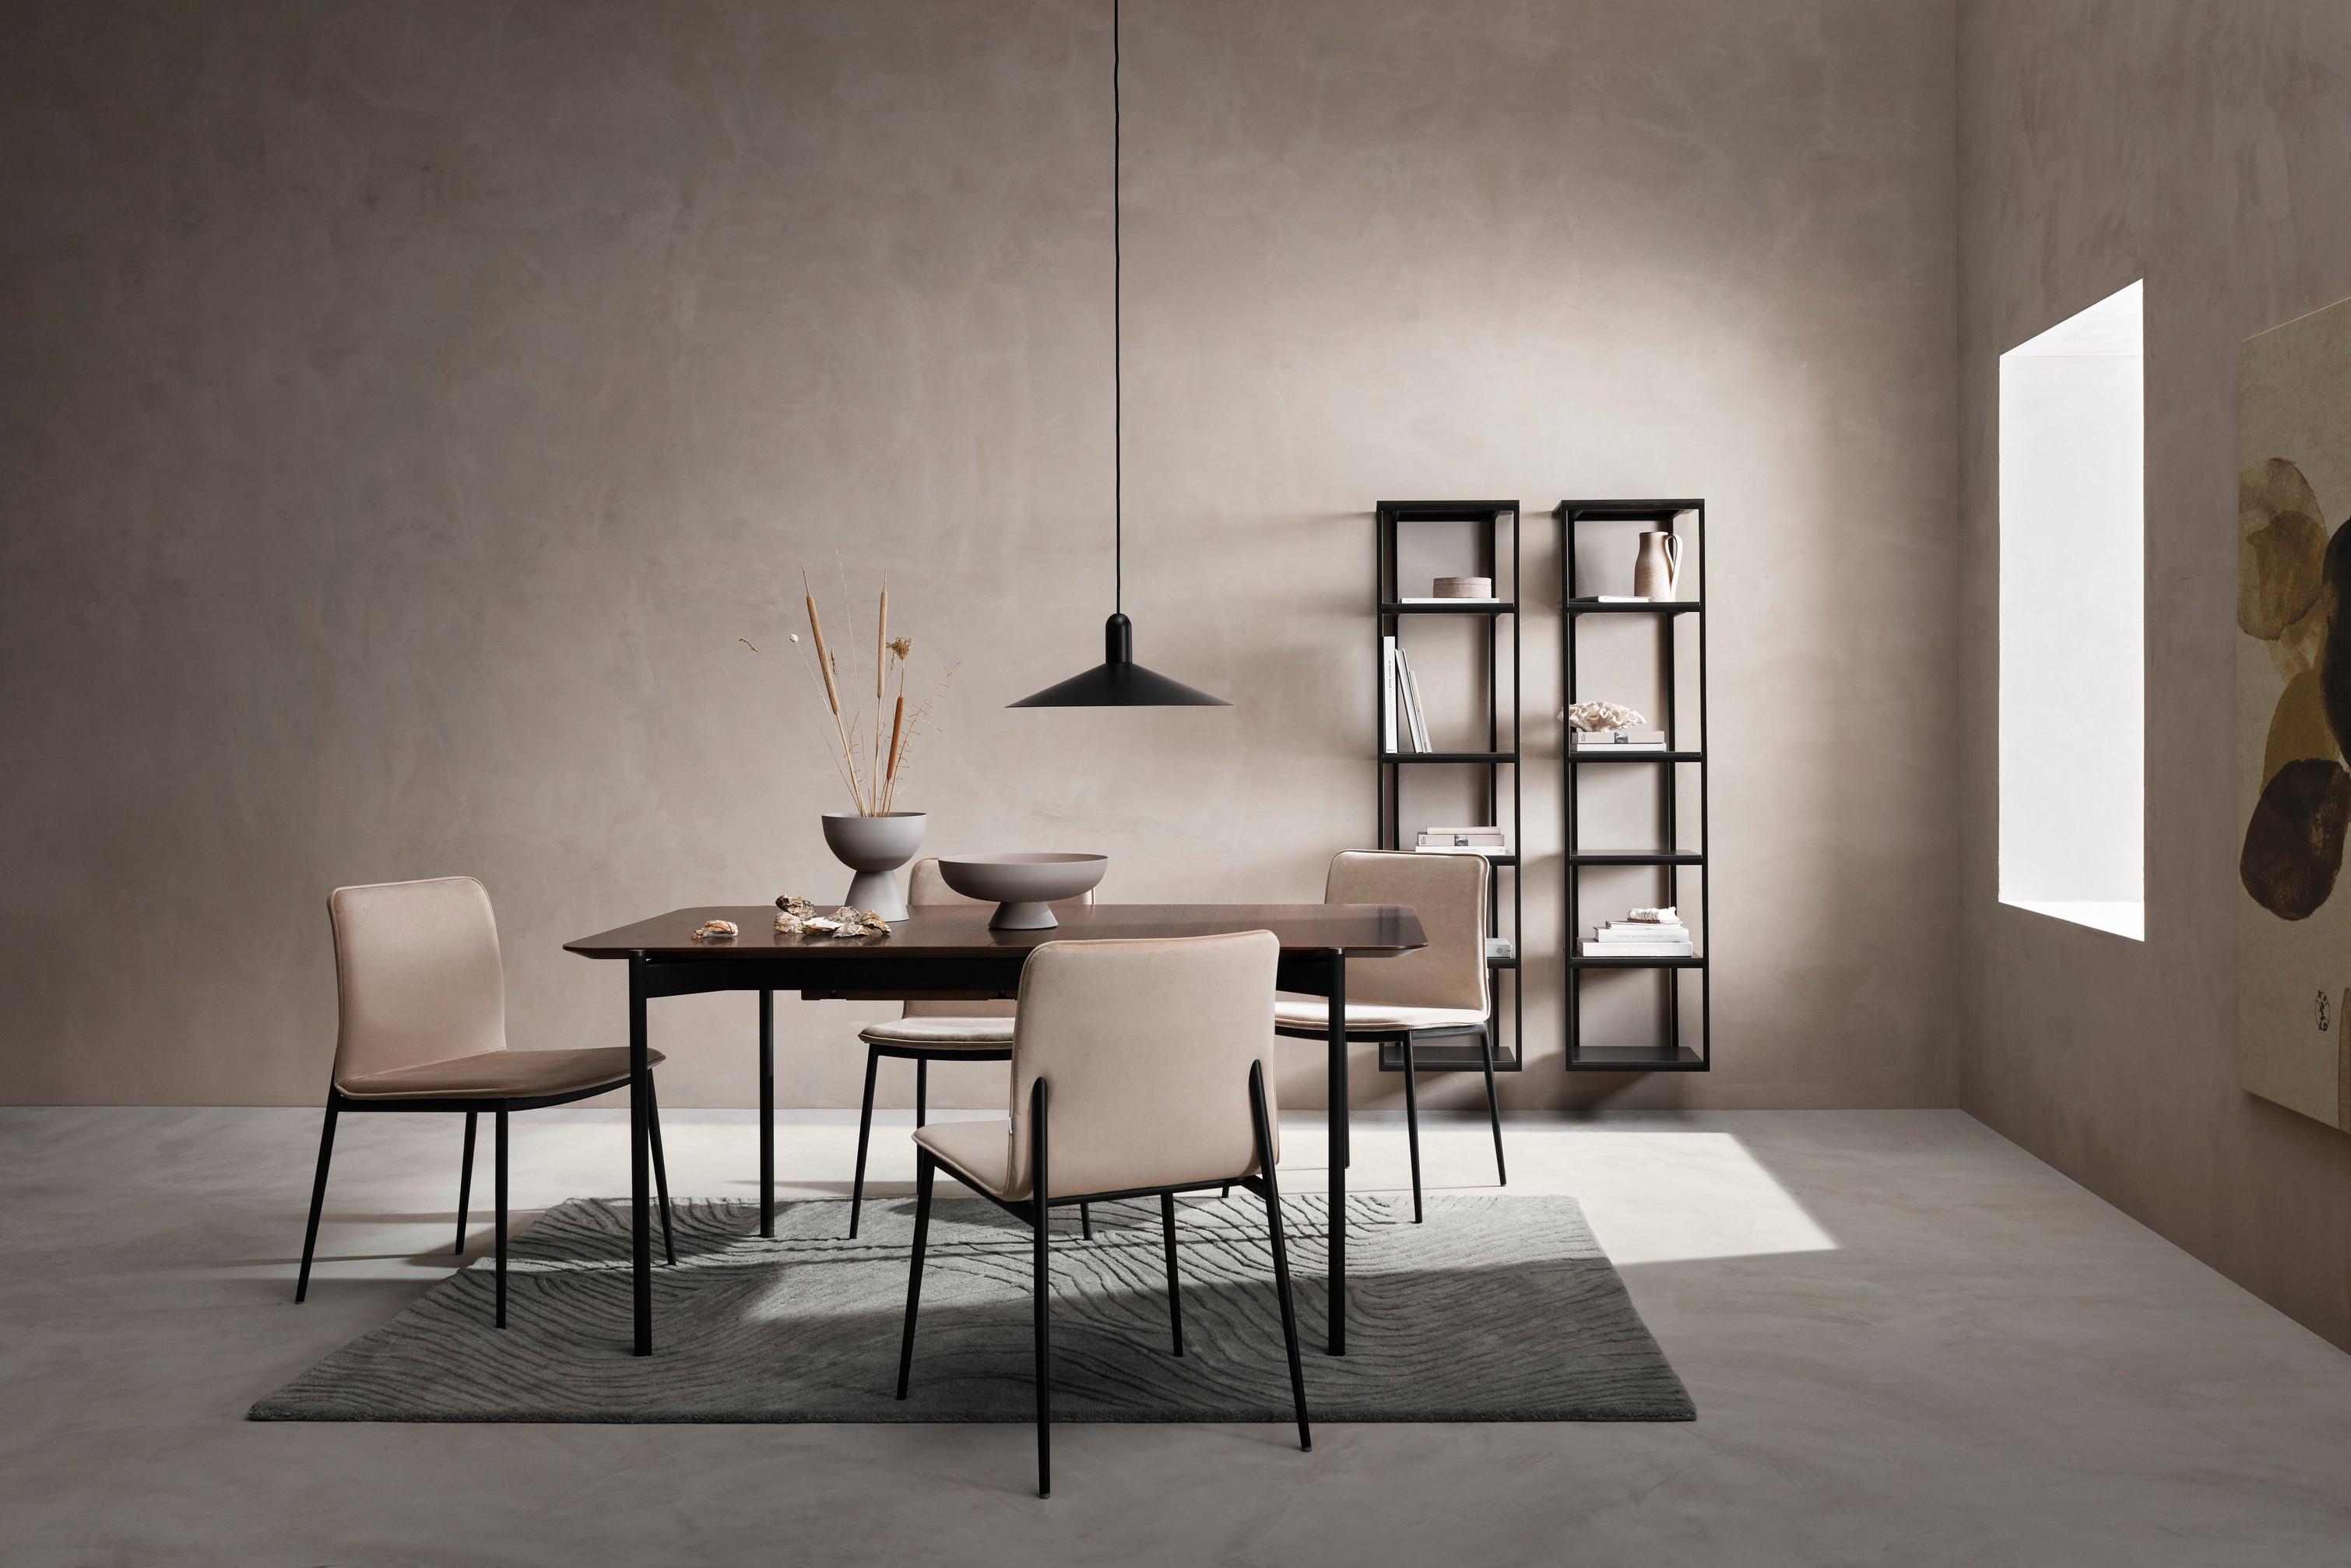 Minimalist dining area with tan chairs, wooden table, pendant lamp, and shelving against a grey wall.